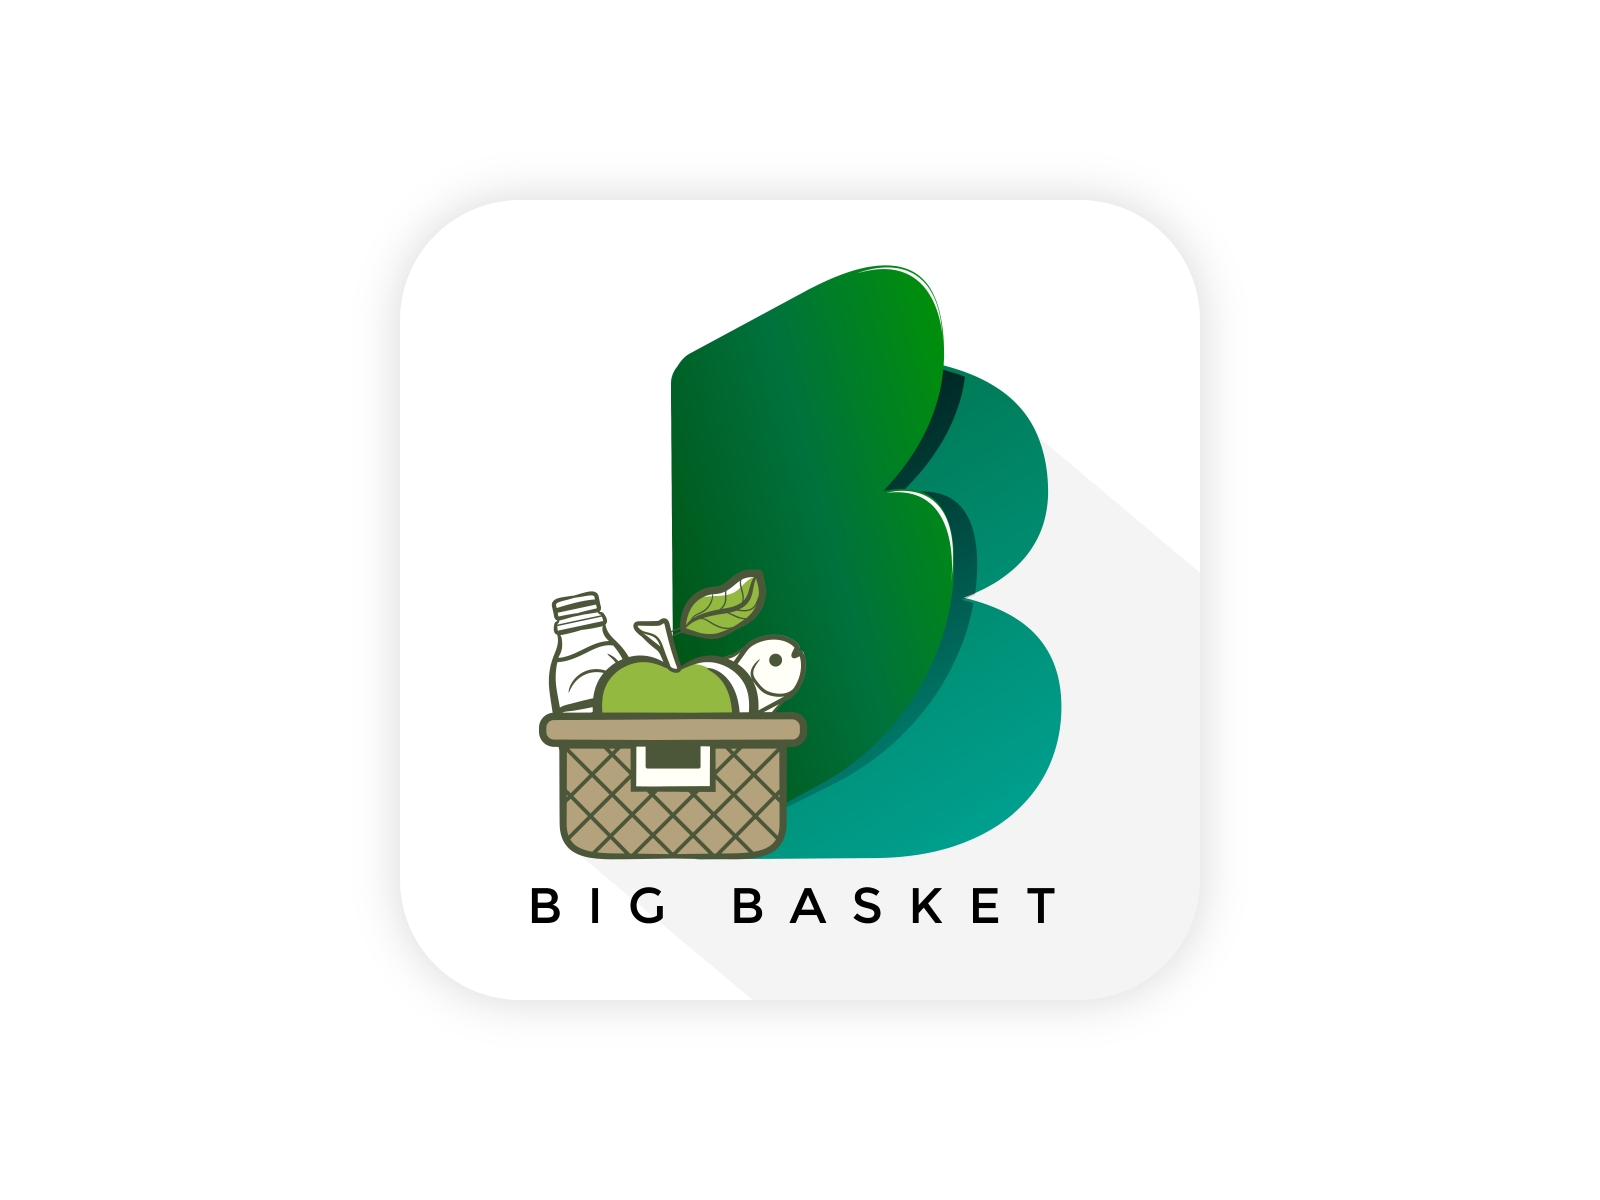 Image of Indian Man showing Big Basket logo on the Phone-ZO469156-Picxy-cheohanoi.vn